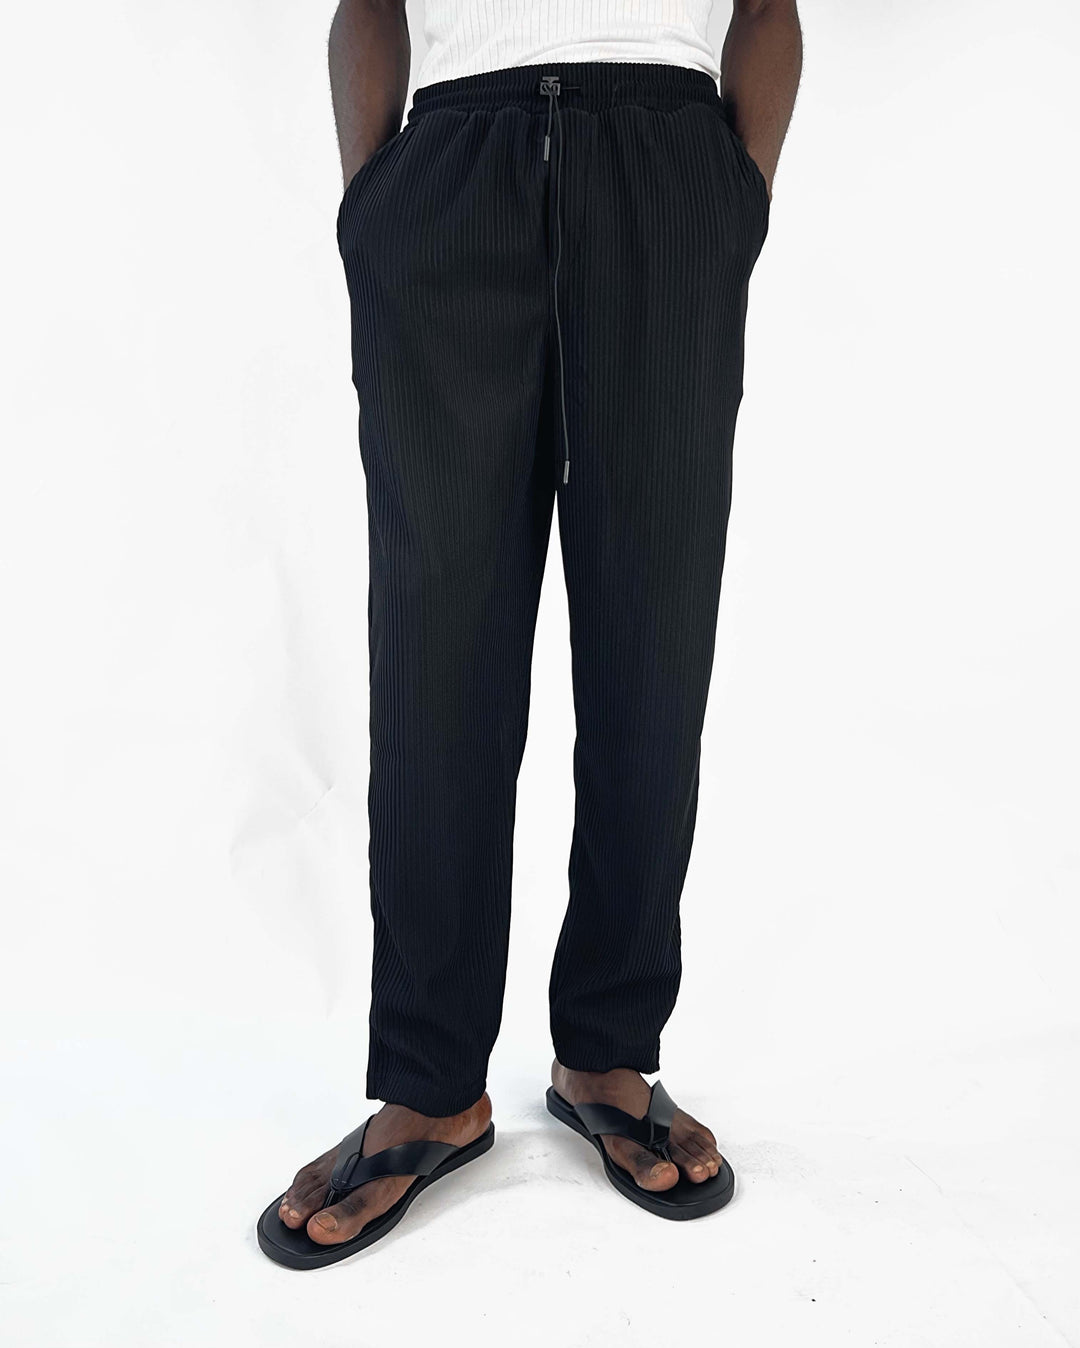 Spruce pleated pants with toggle drawstring in black